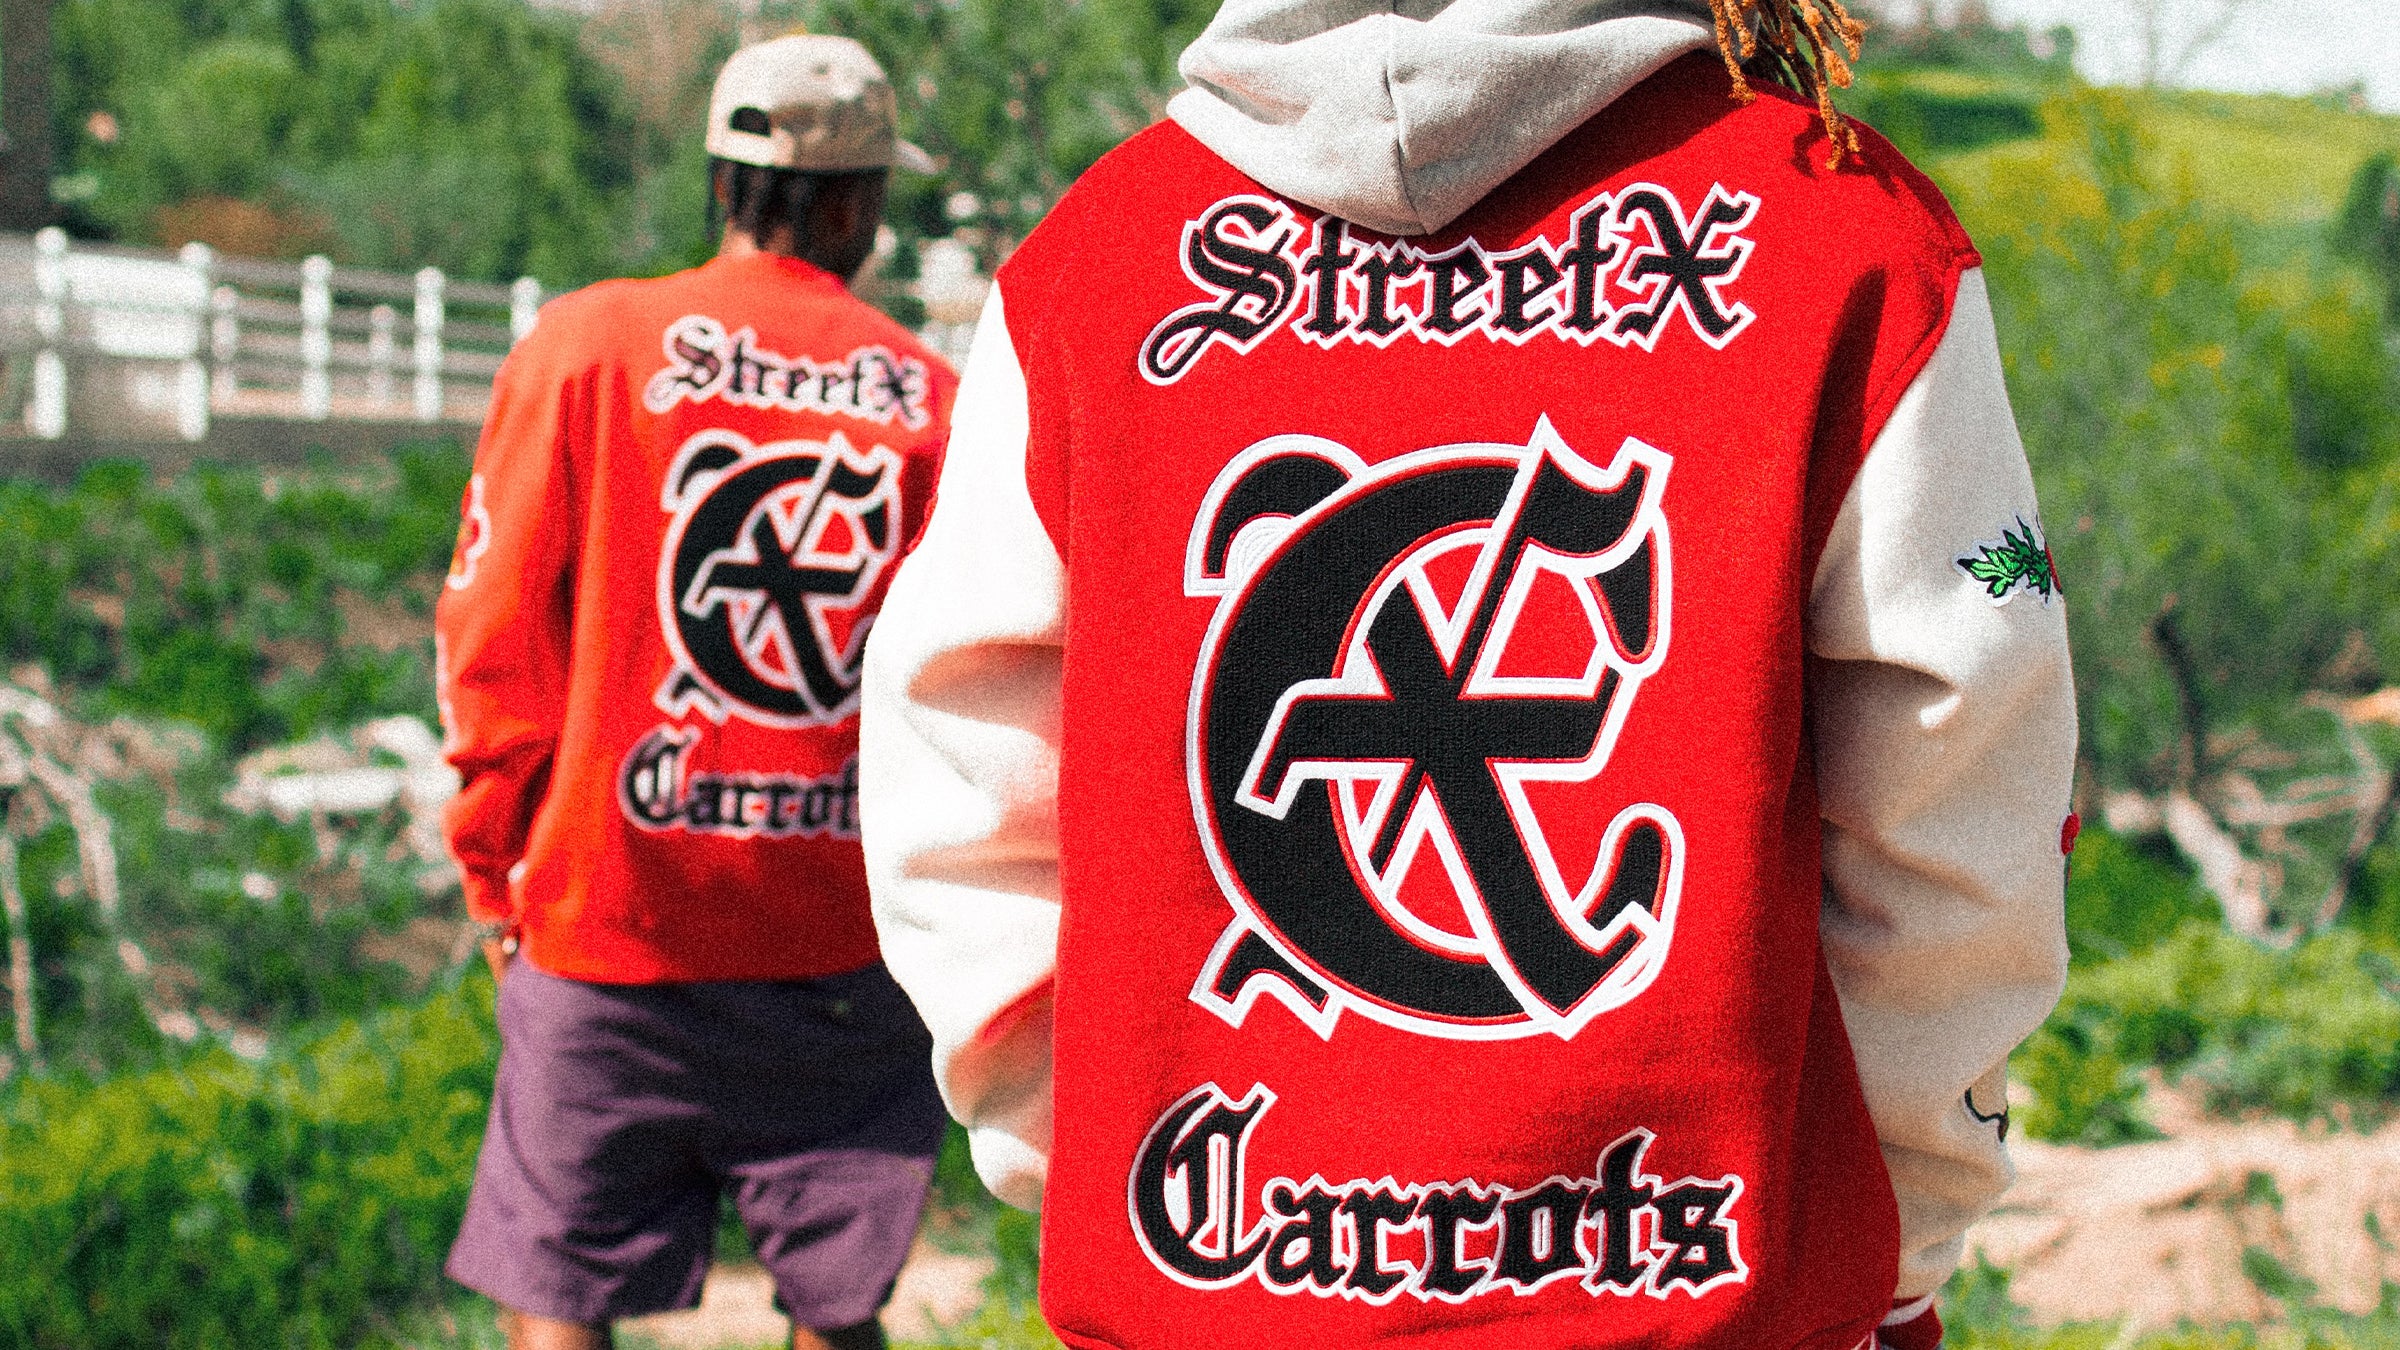 The StreetX Carrots Collection